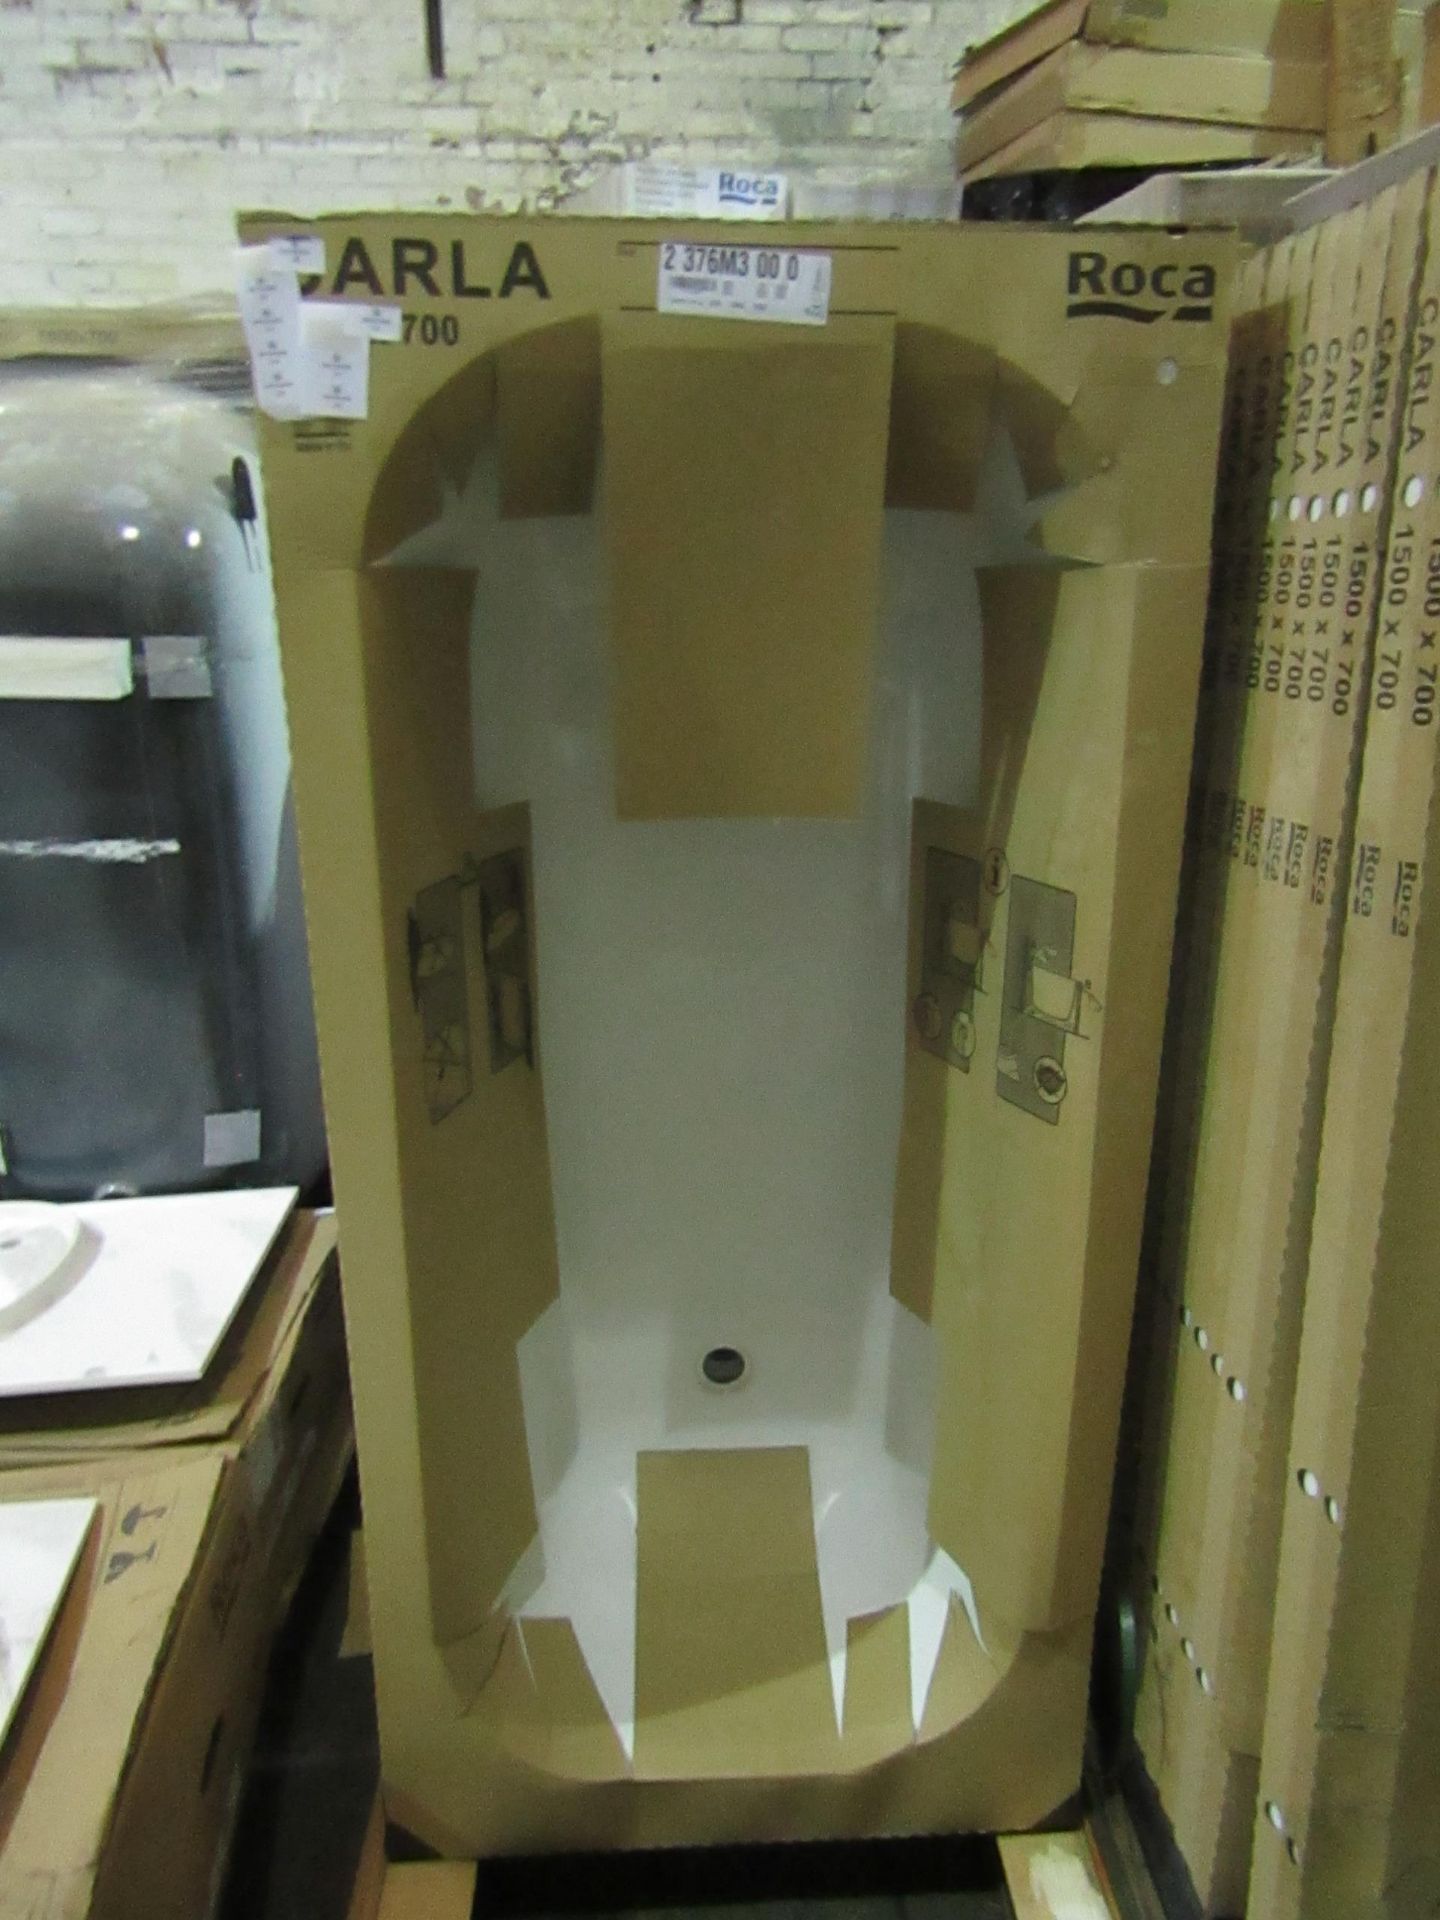 Roca - Carla Steel Bathtub White - 1500x700mm - Unused & Boxed, come with handles and feet. RRP